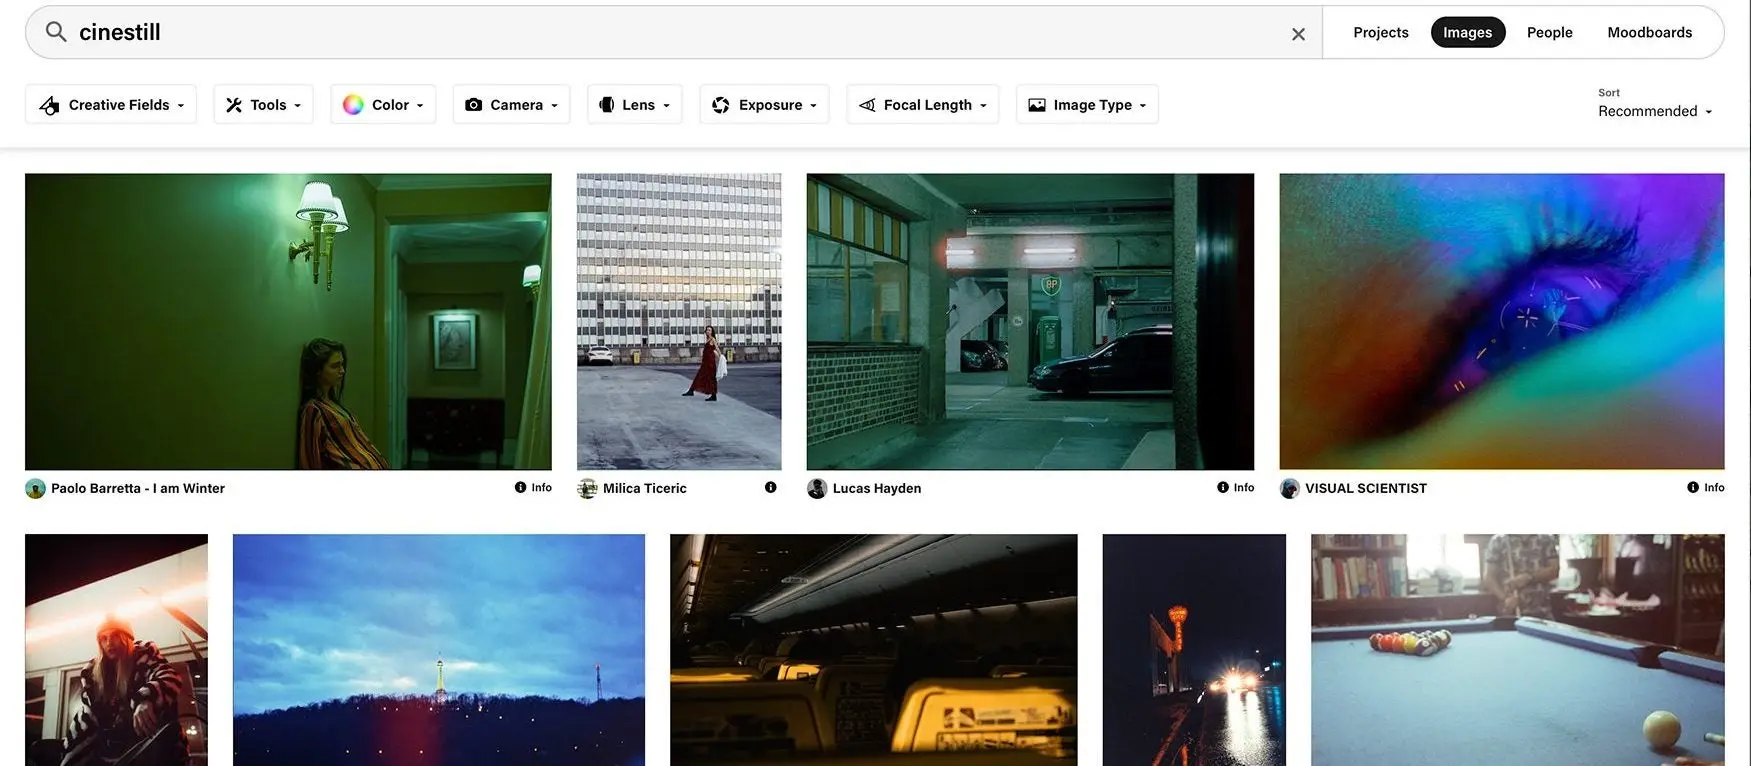 Image search results on Behance for the query 'cinestill'.